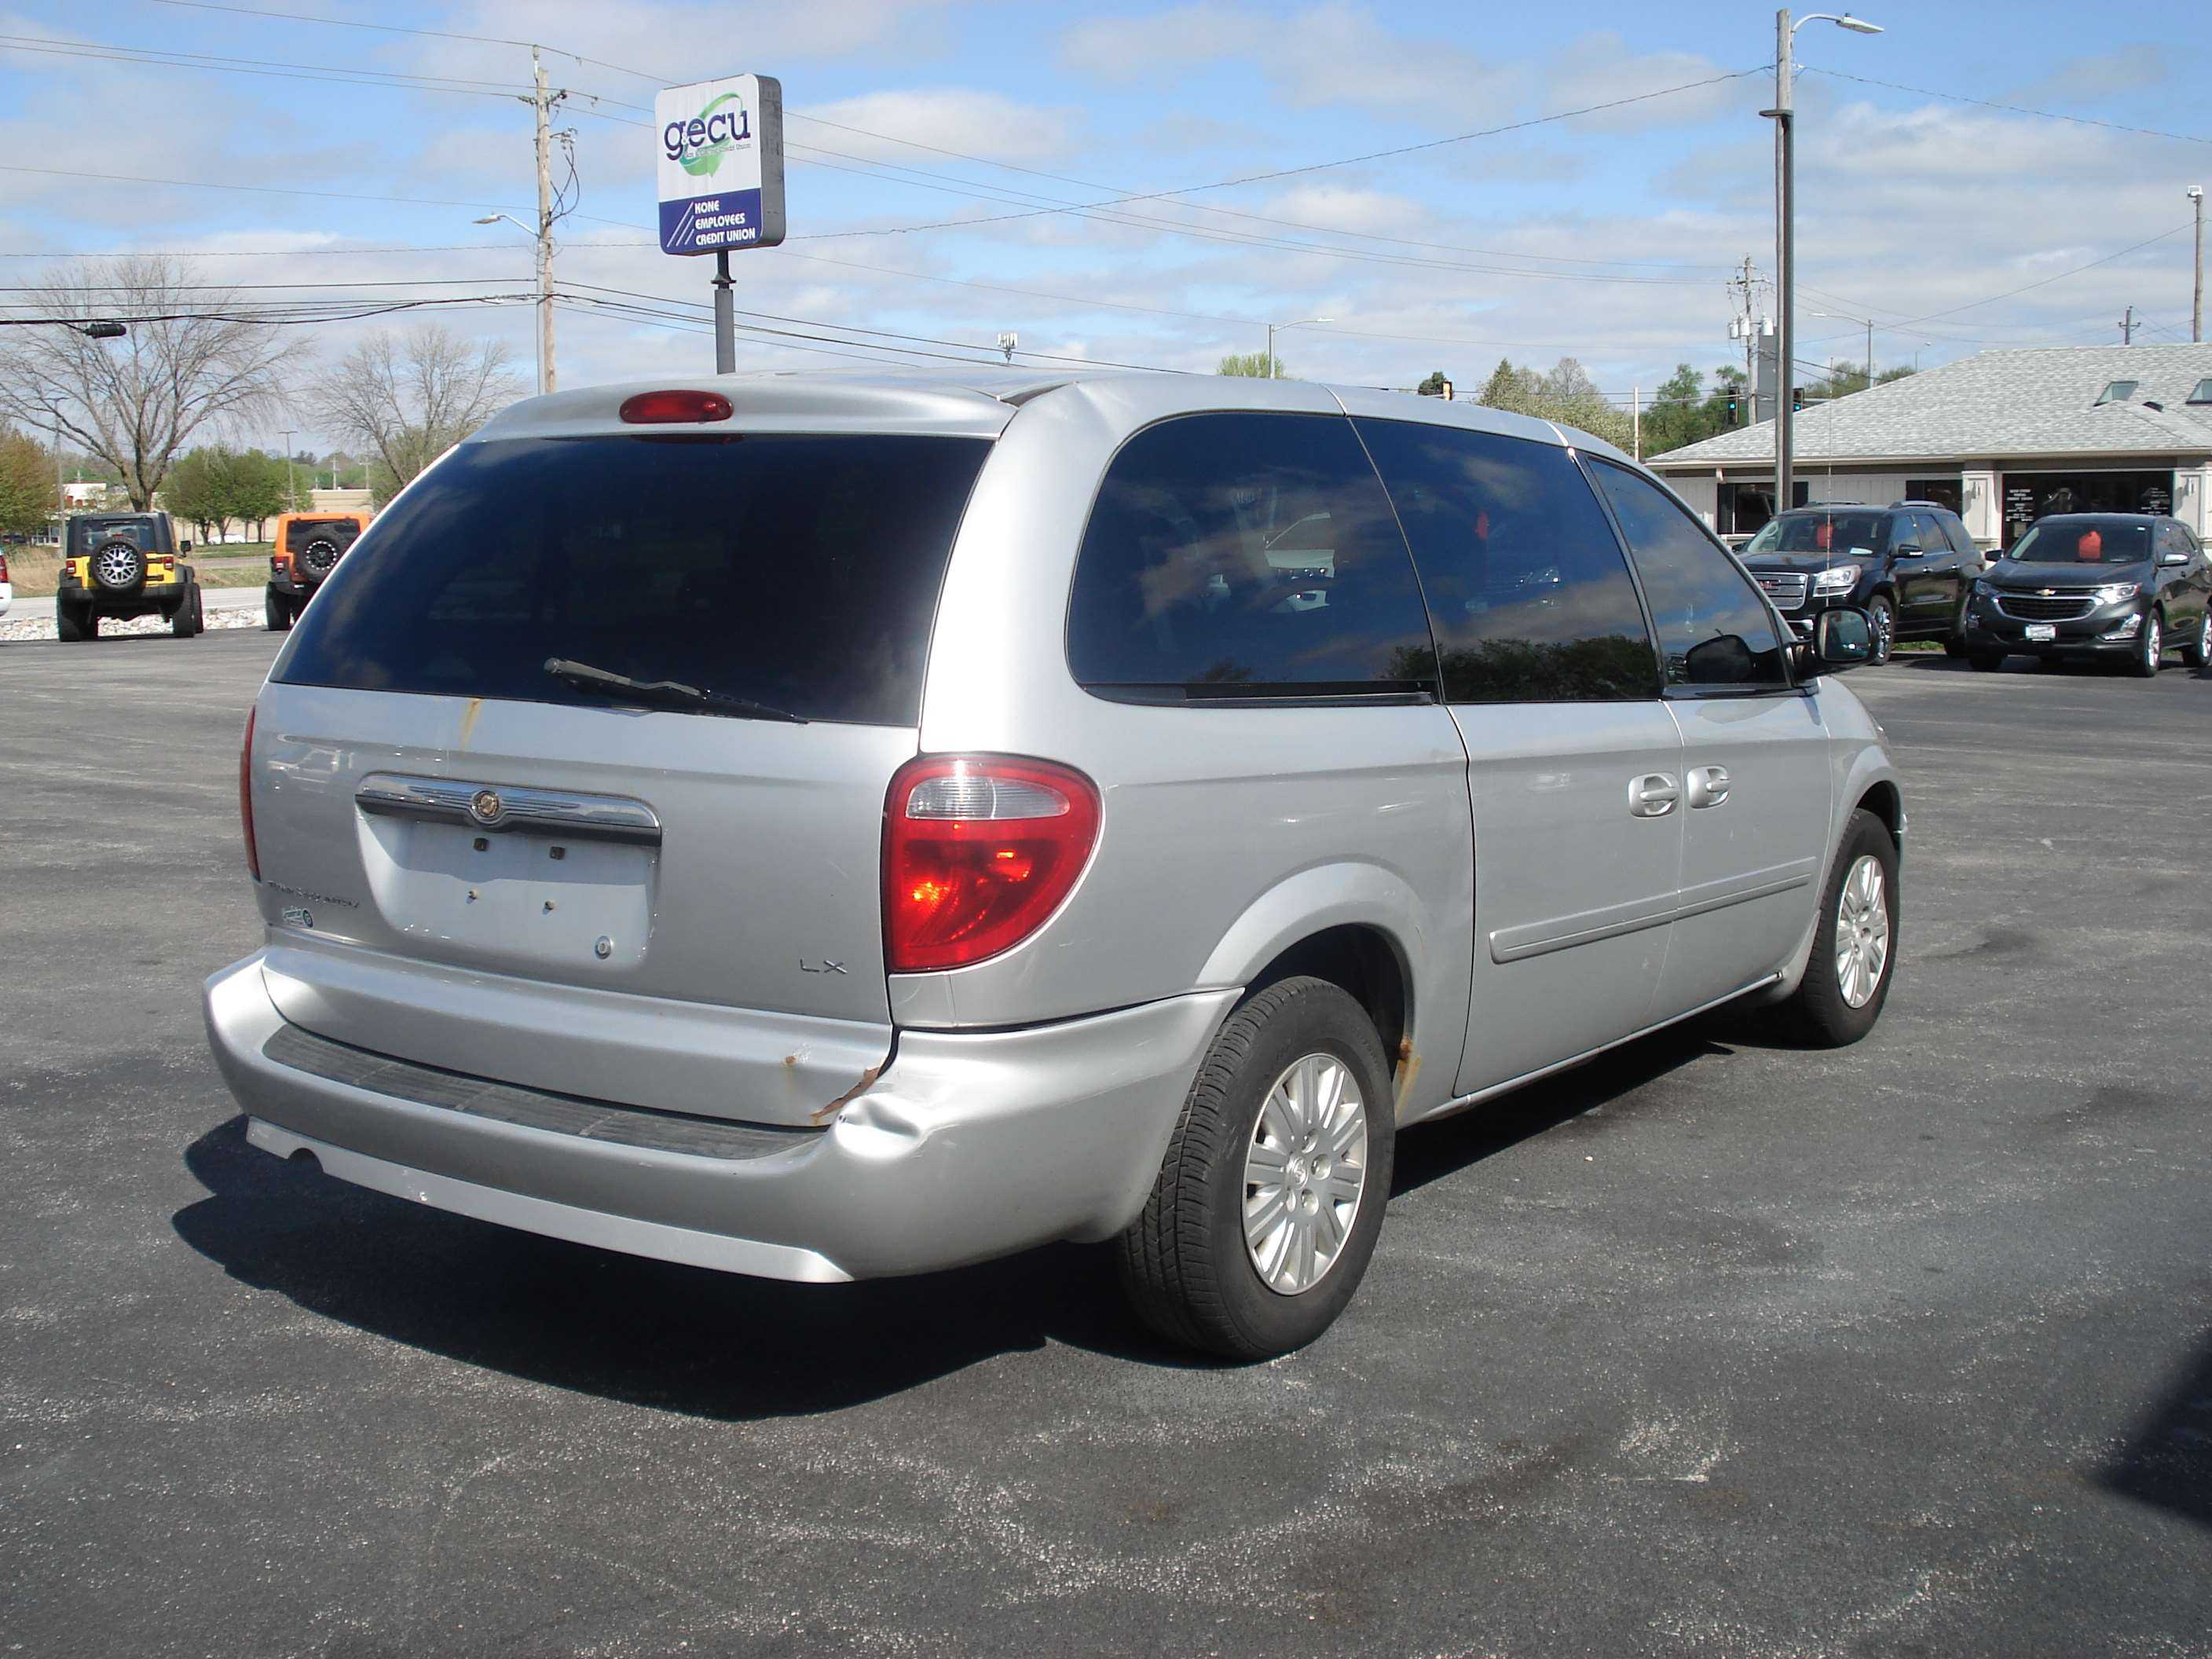 Chrysler Town And Country Image 6